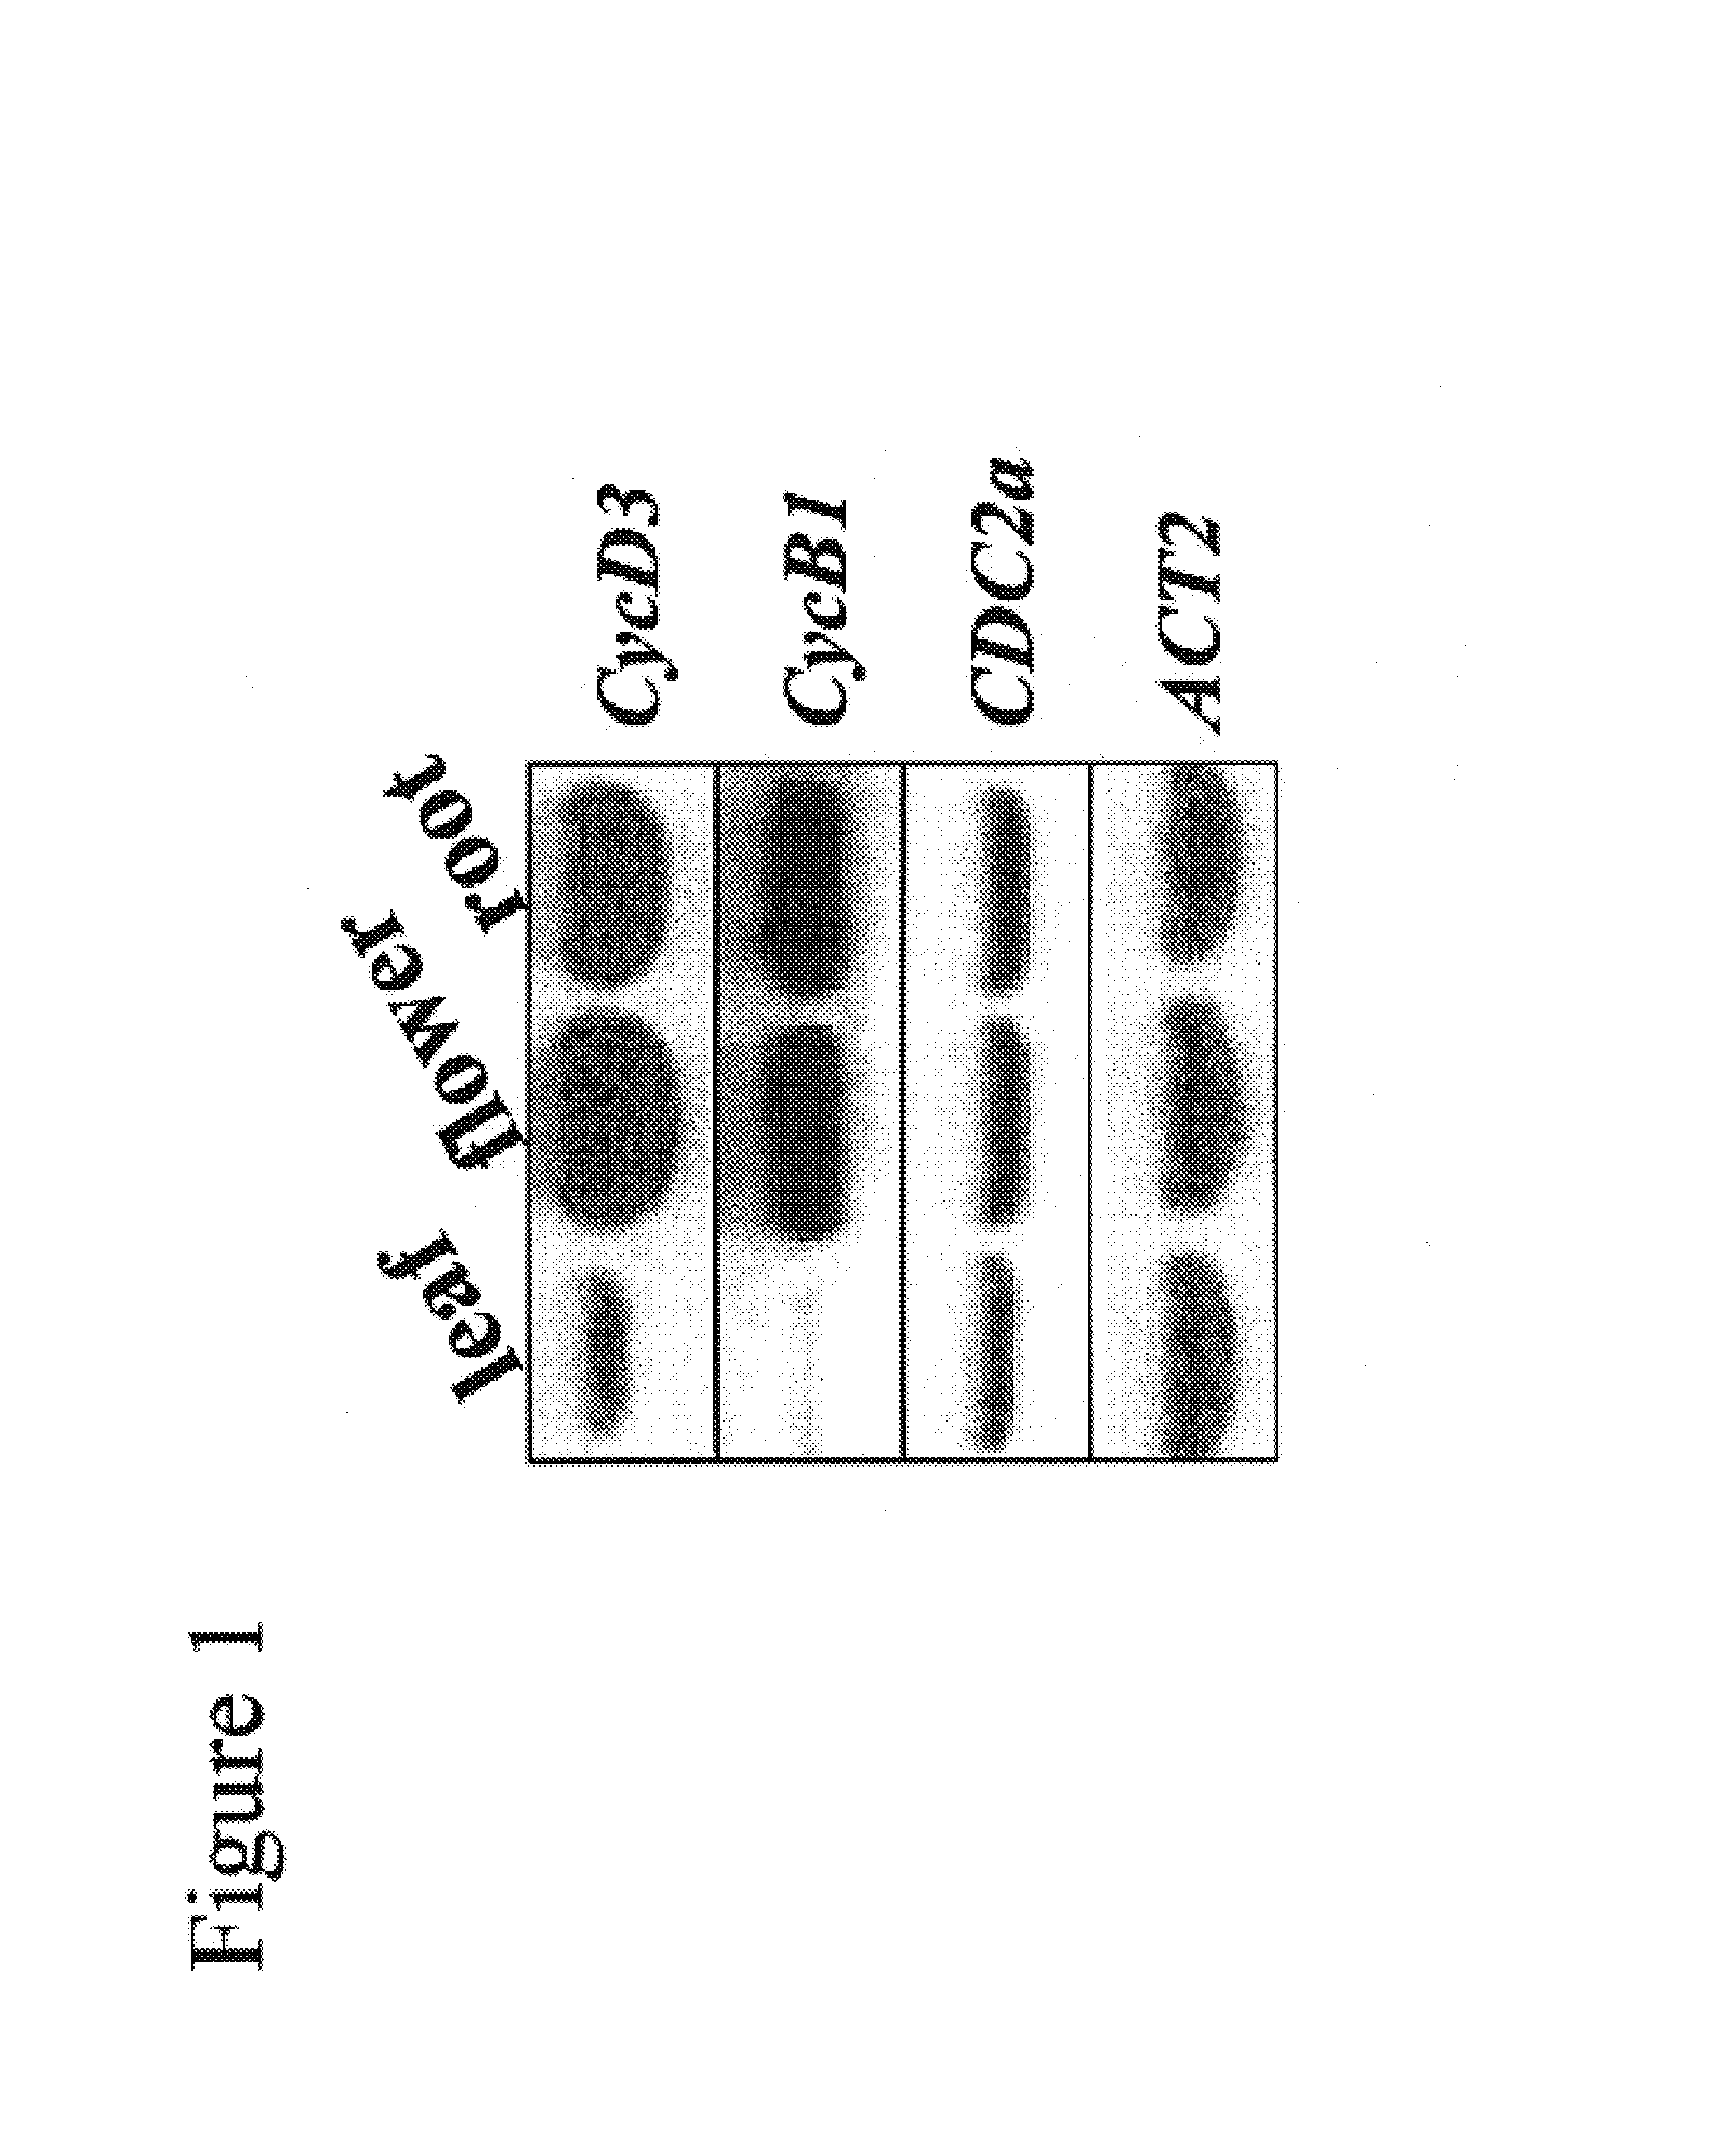 Transgenic plants expressing cytokinin biosynthetic genes and methods of use therefor